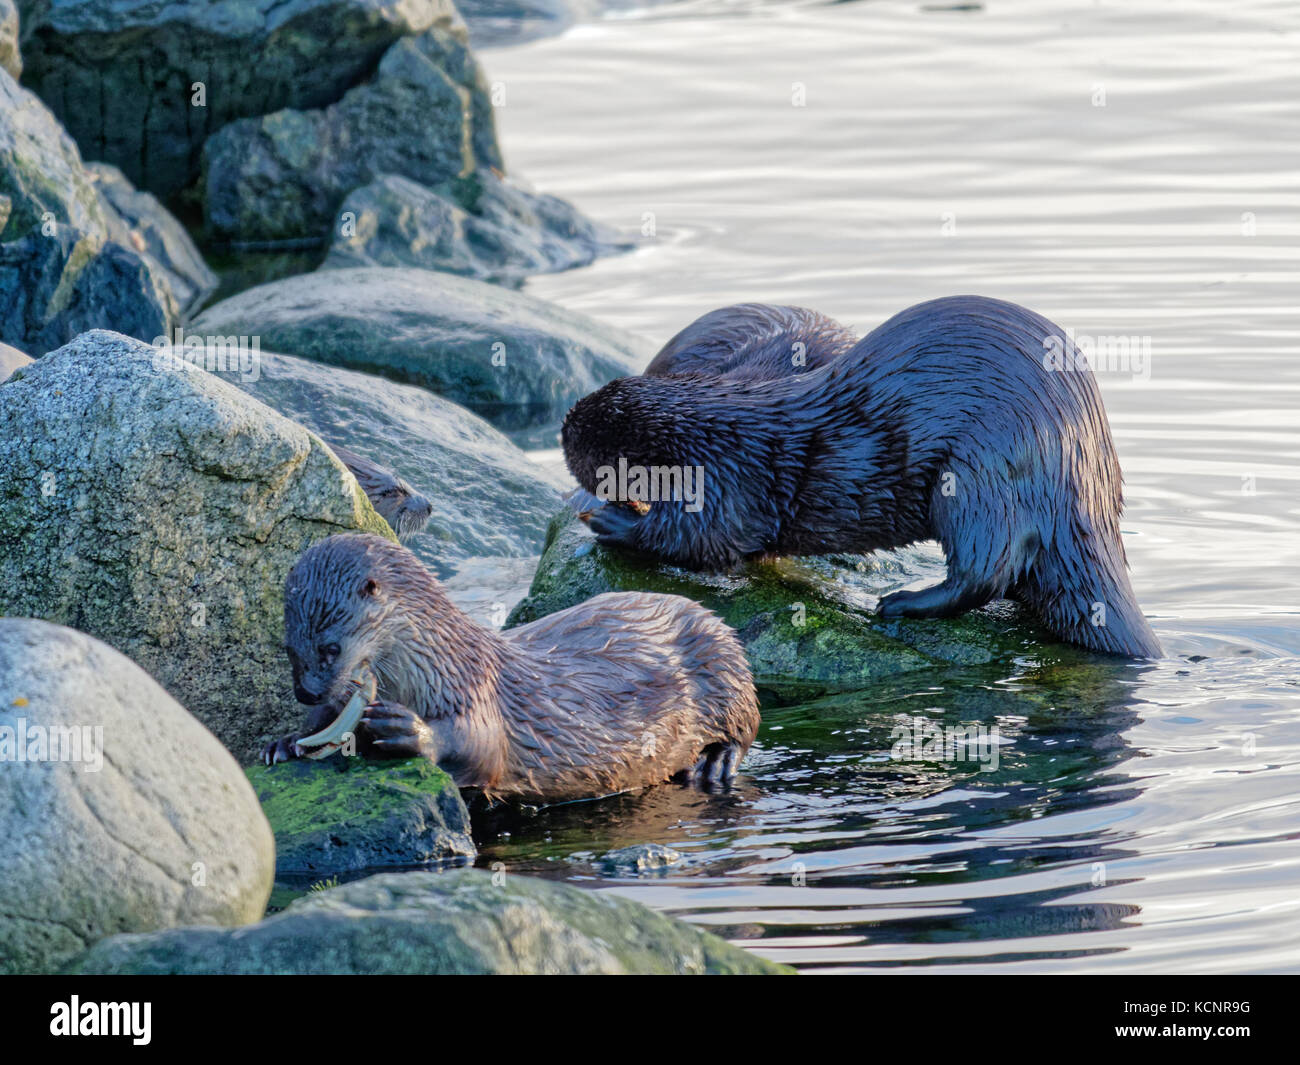 North American river otter (Lontra canadensis), also known as the northern river otter or the common otter, a semiaquatic mammal endemic to the North American Stock Photo